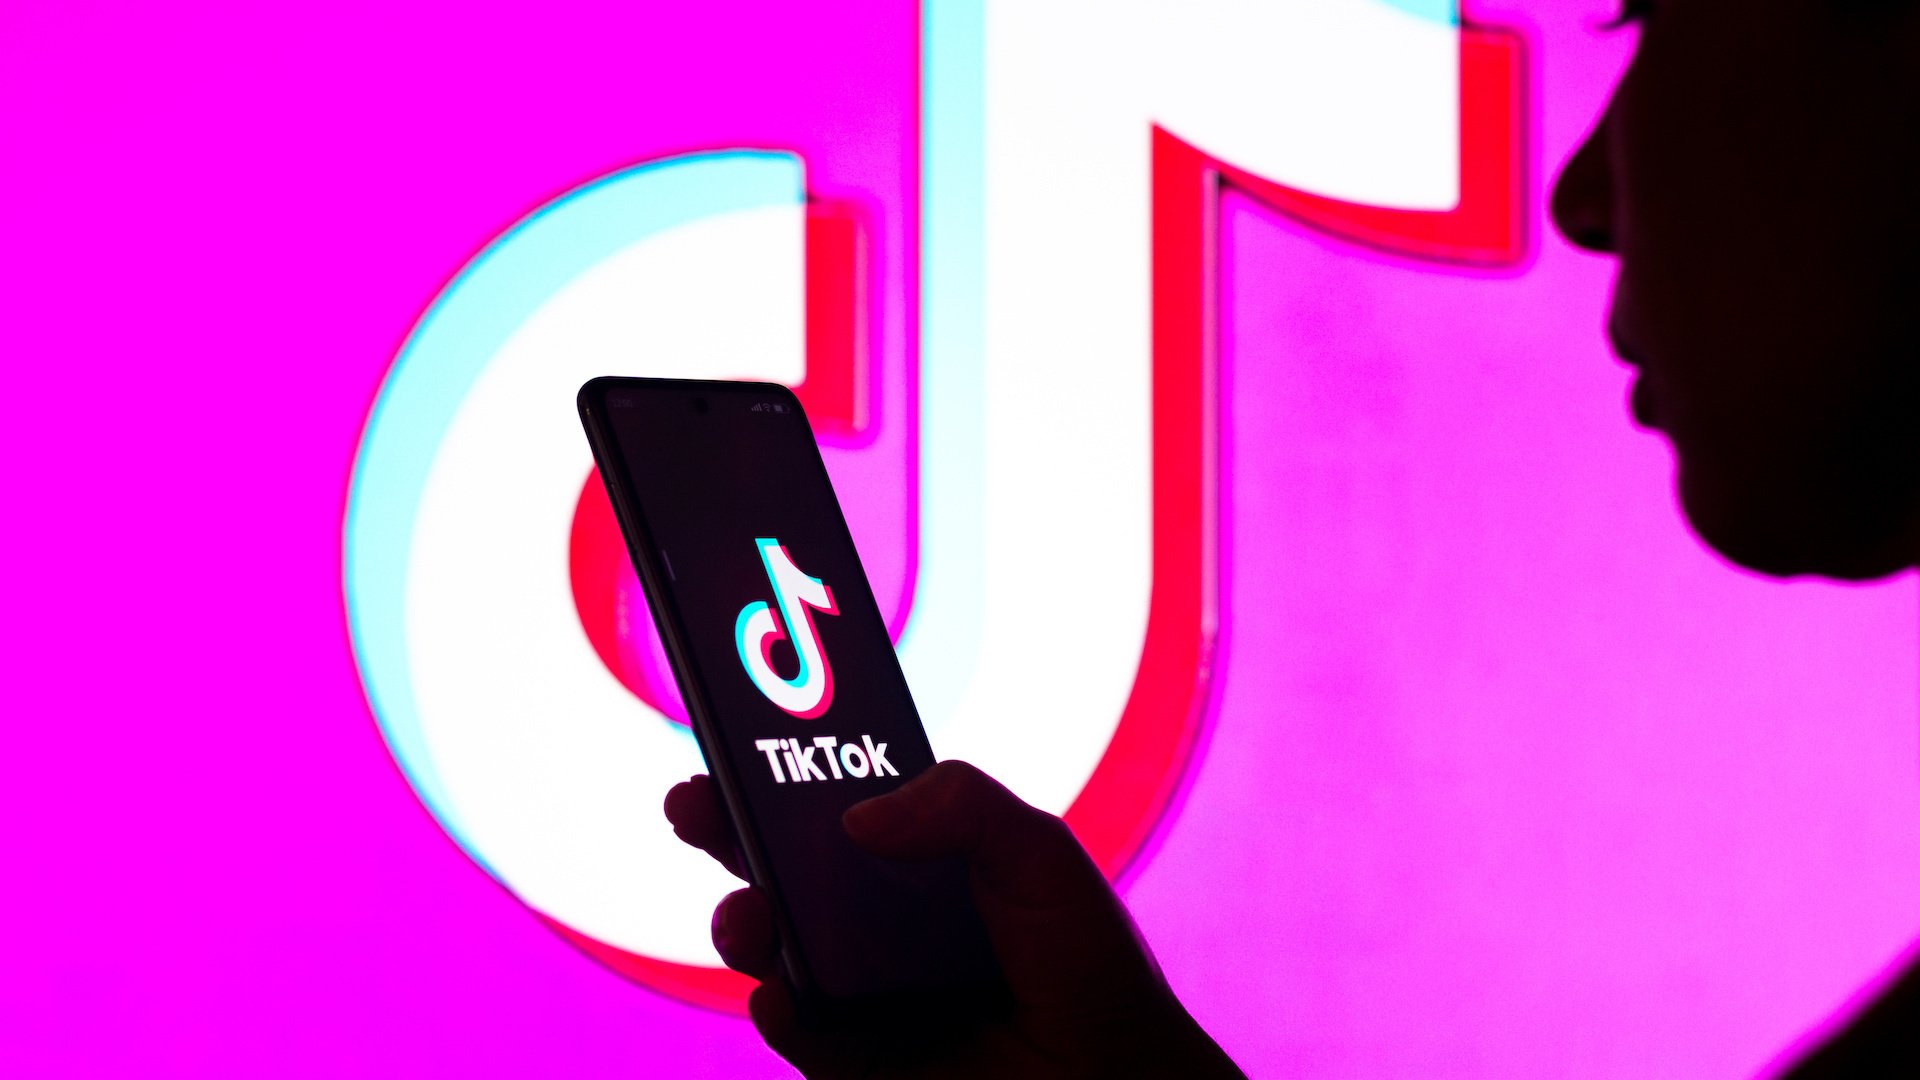  In this photo illustration, a woman's silhouette holds a smartphone with the TikTok logo displayed on the screen and in the background.